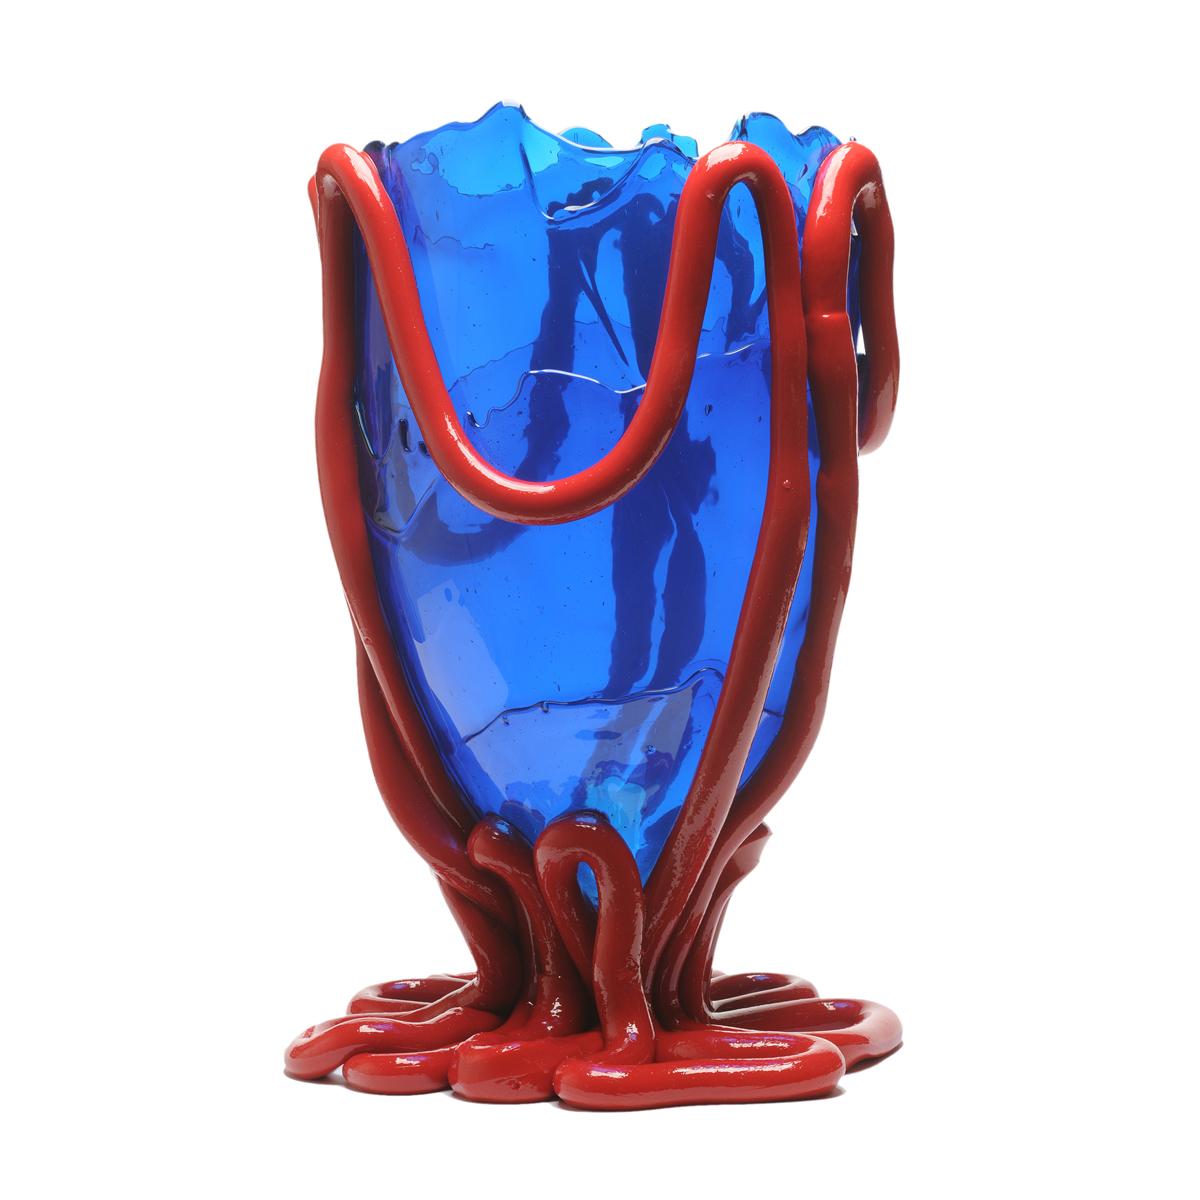 Italian Contemporary Gaetano Pesce Indian Summer L Vase Soft Resin Blue Red For Sale